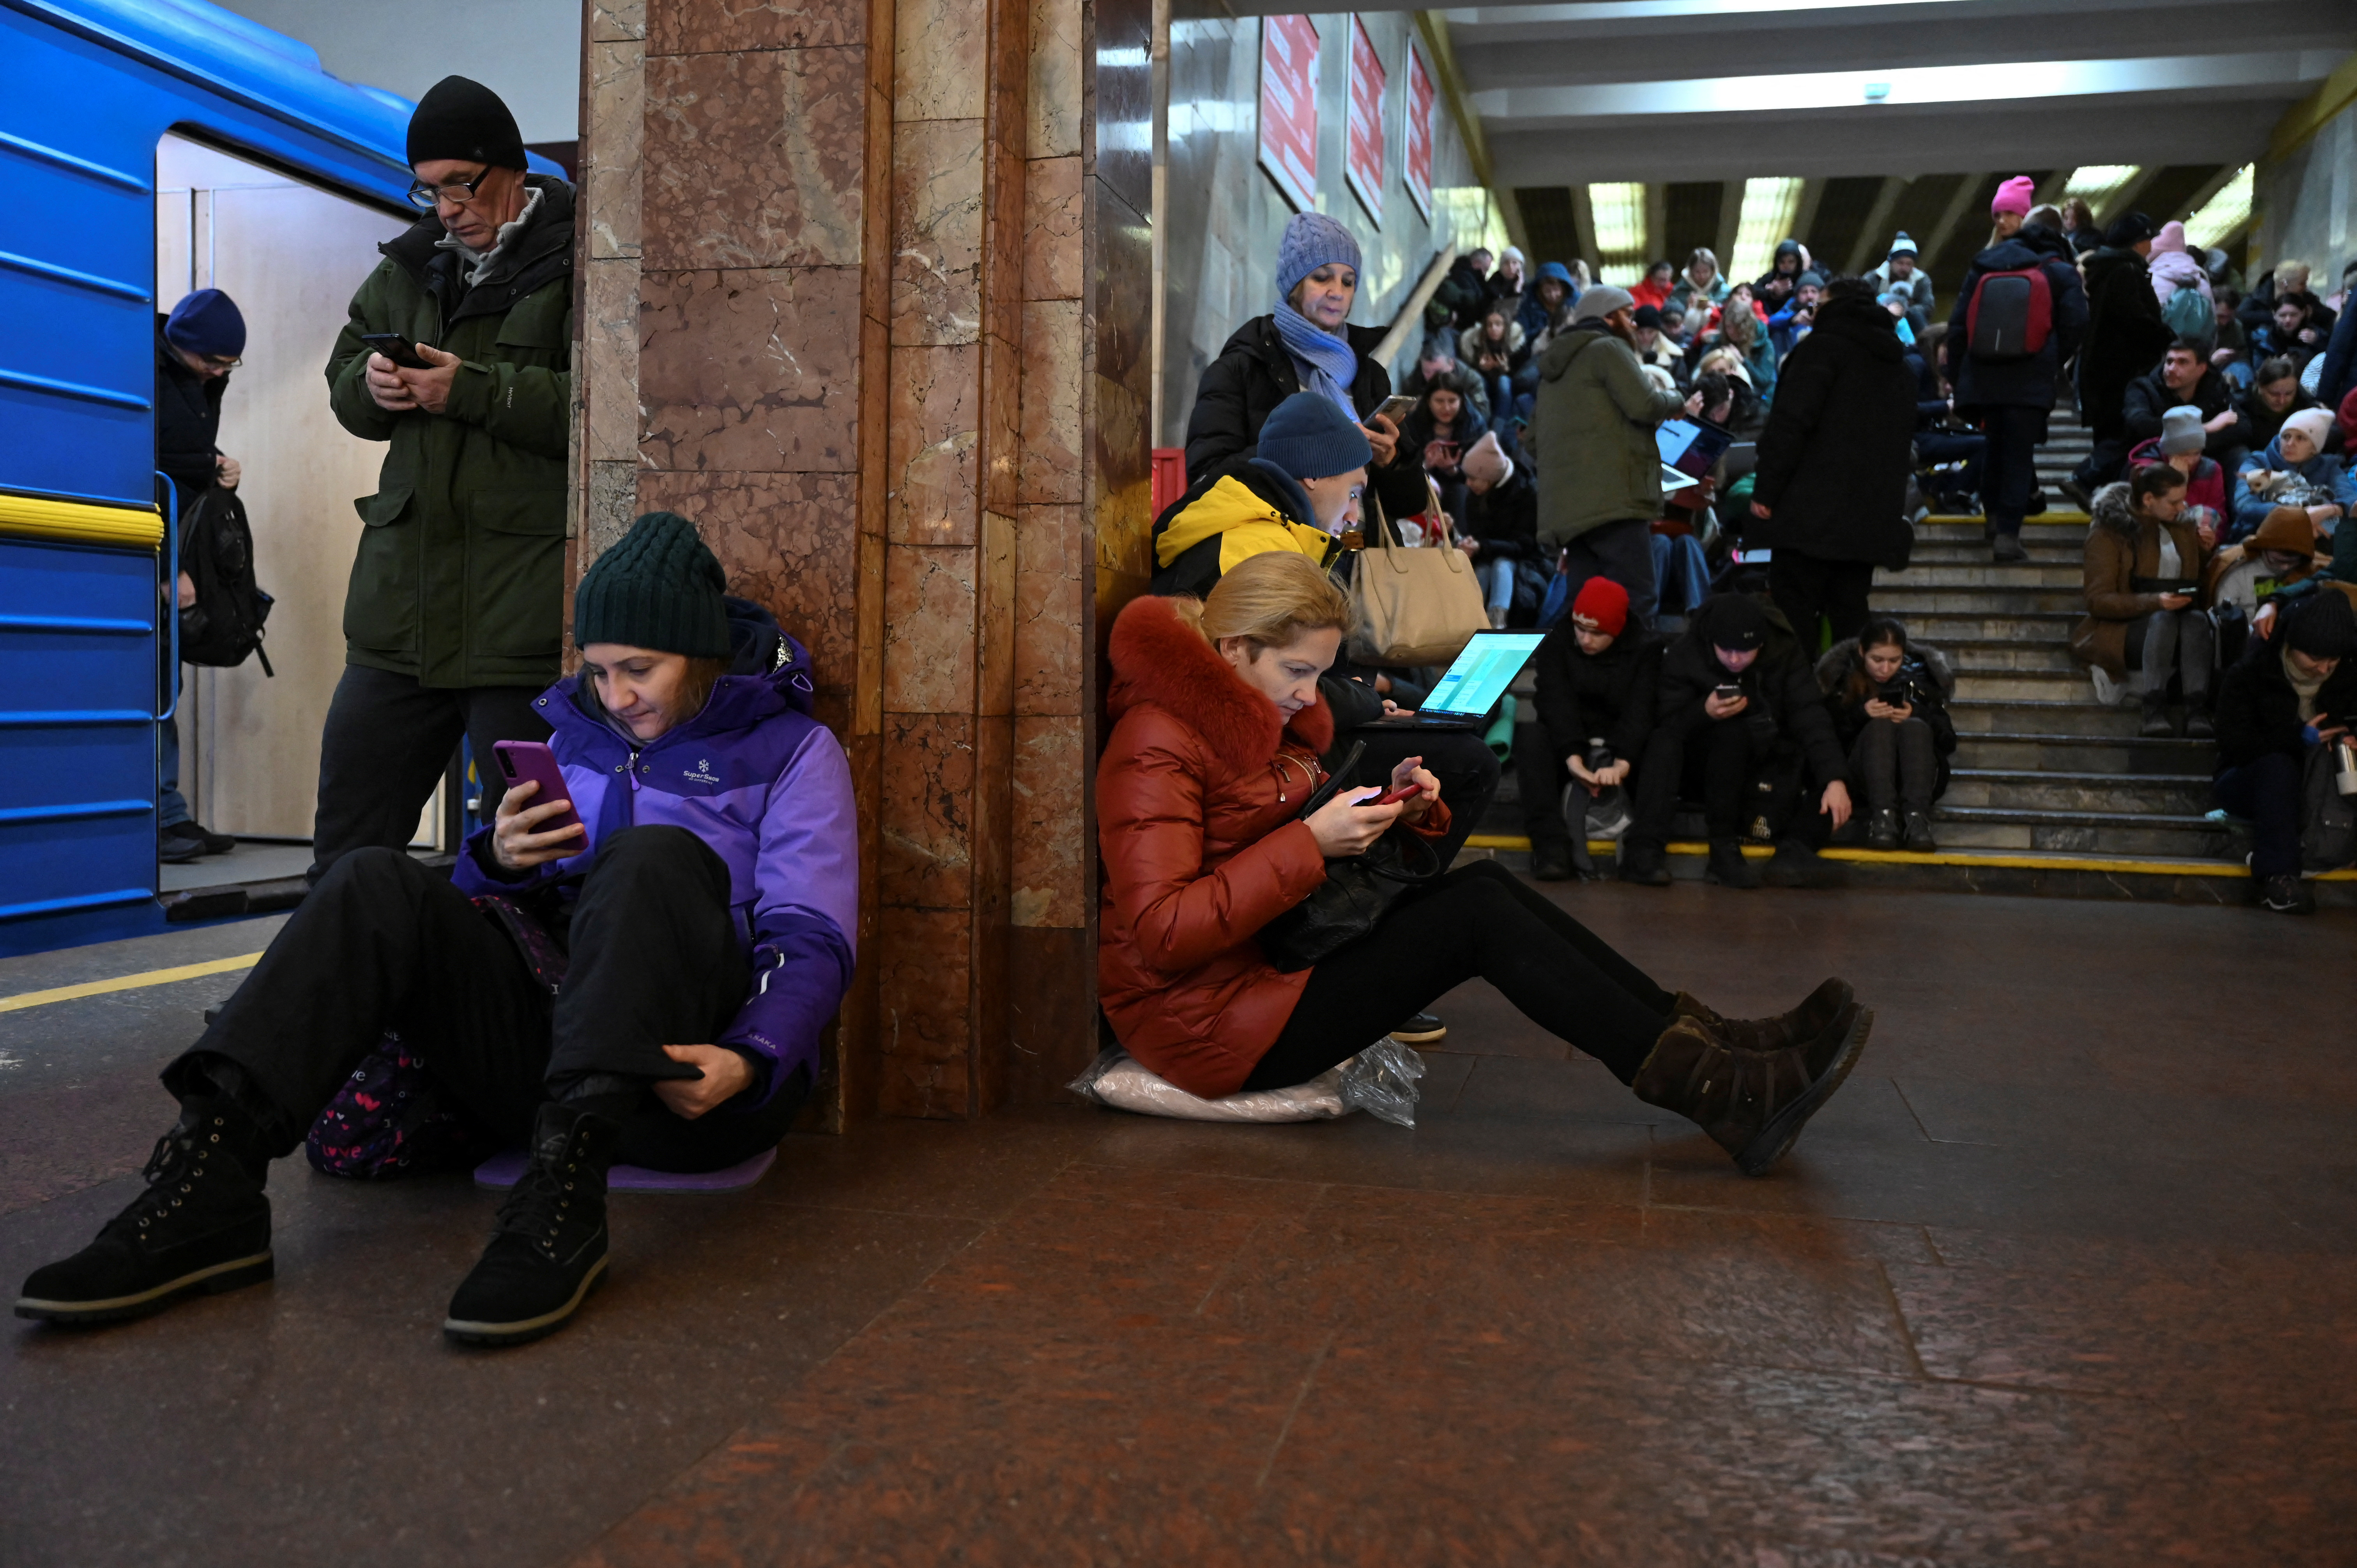 People take shelter inside a metro station during massive Russian missile attacks in Kyiv